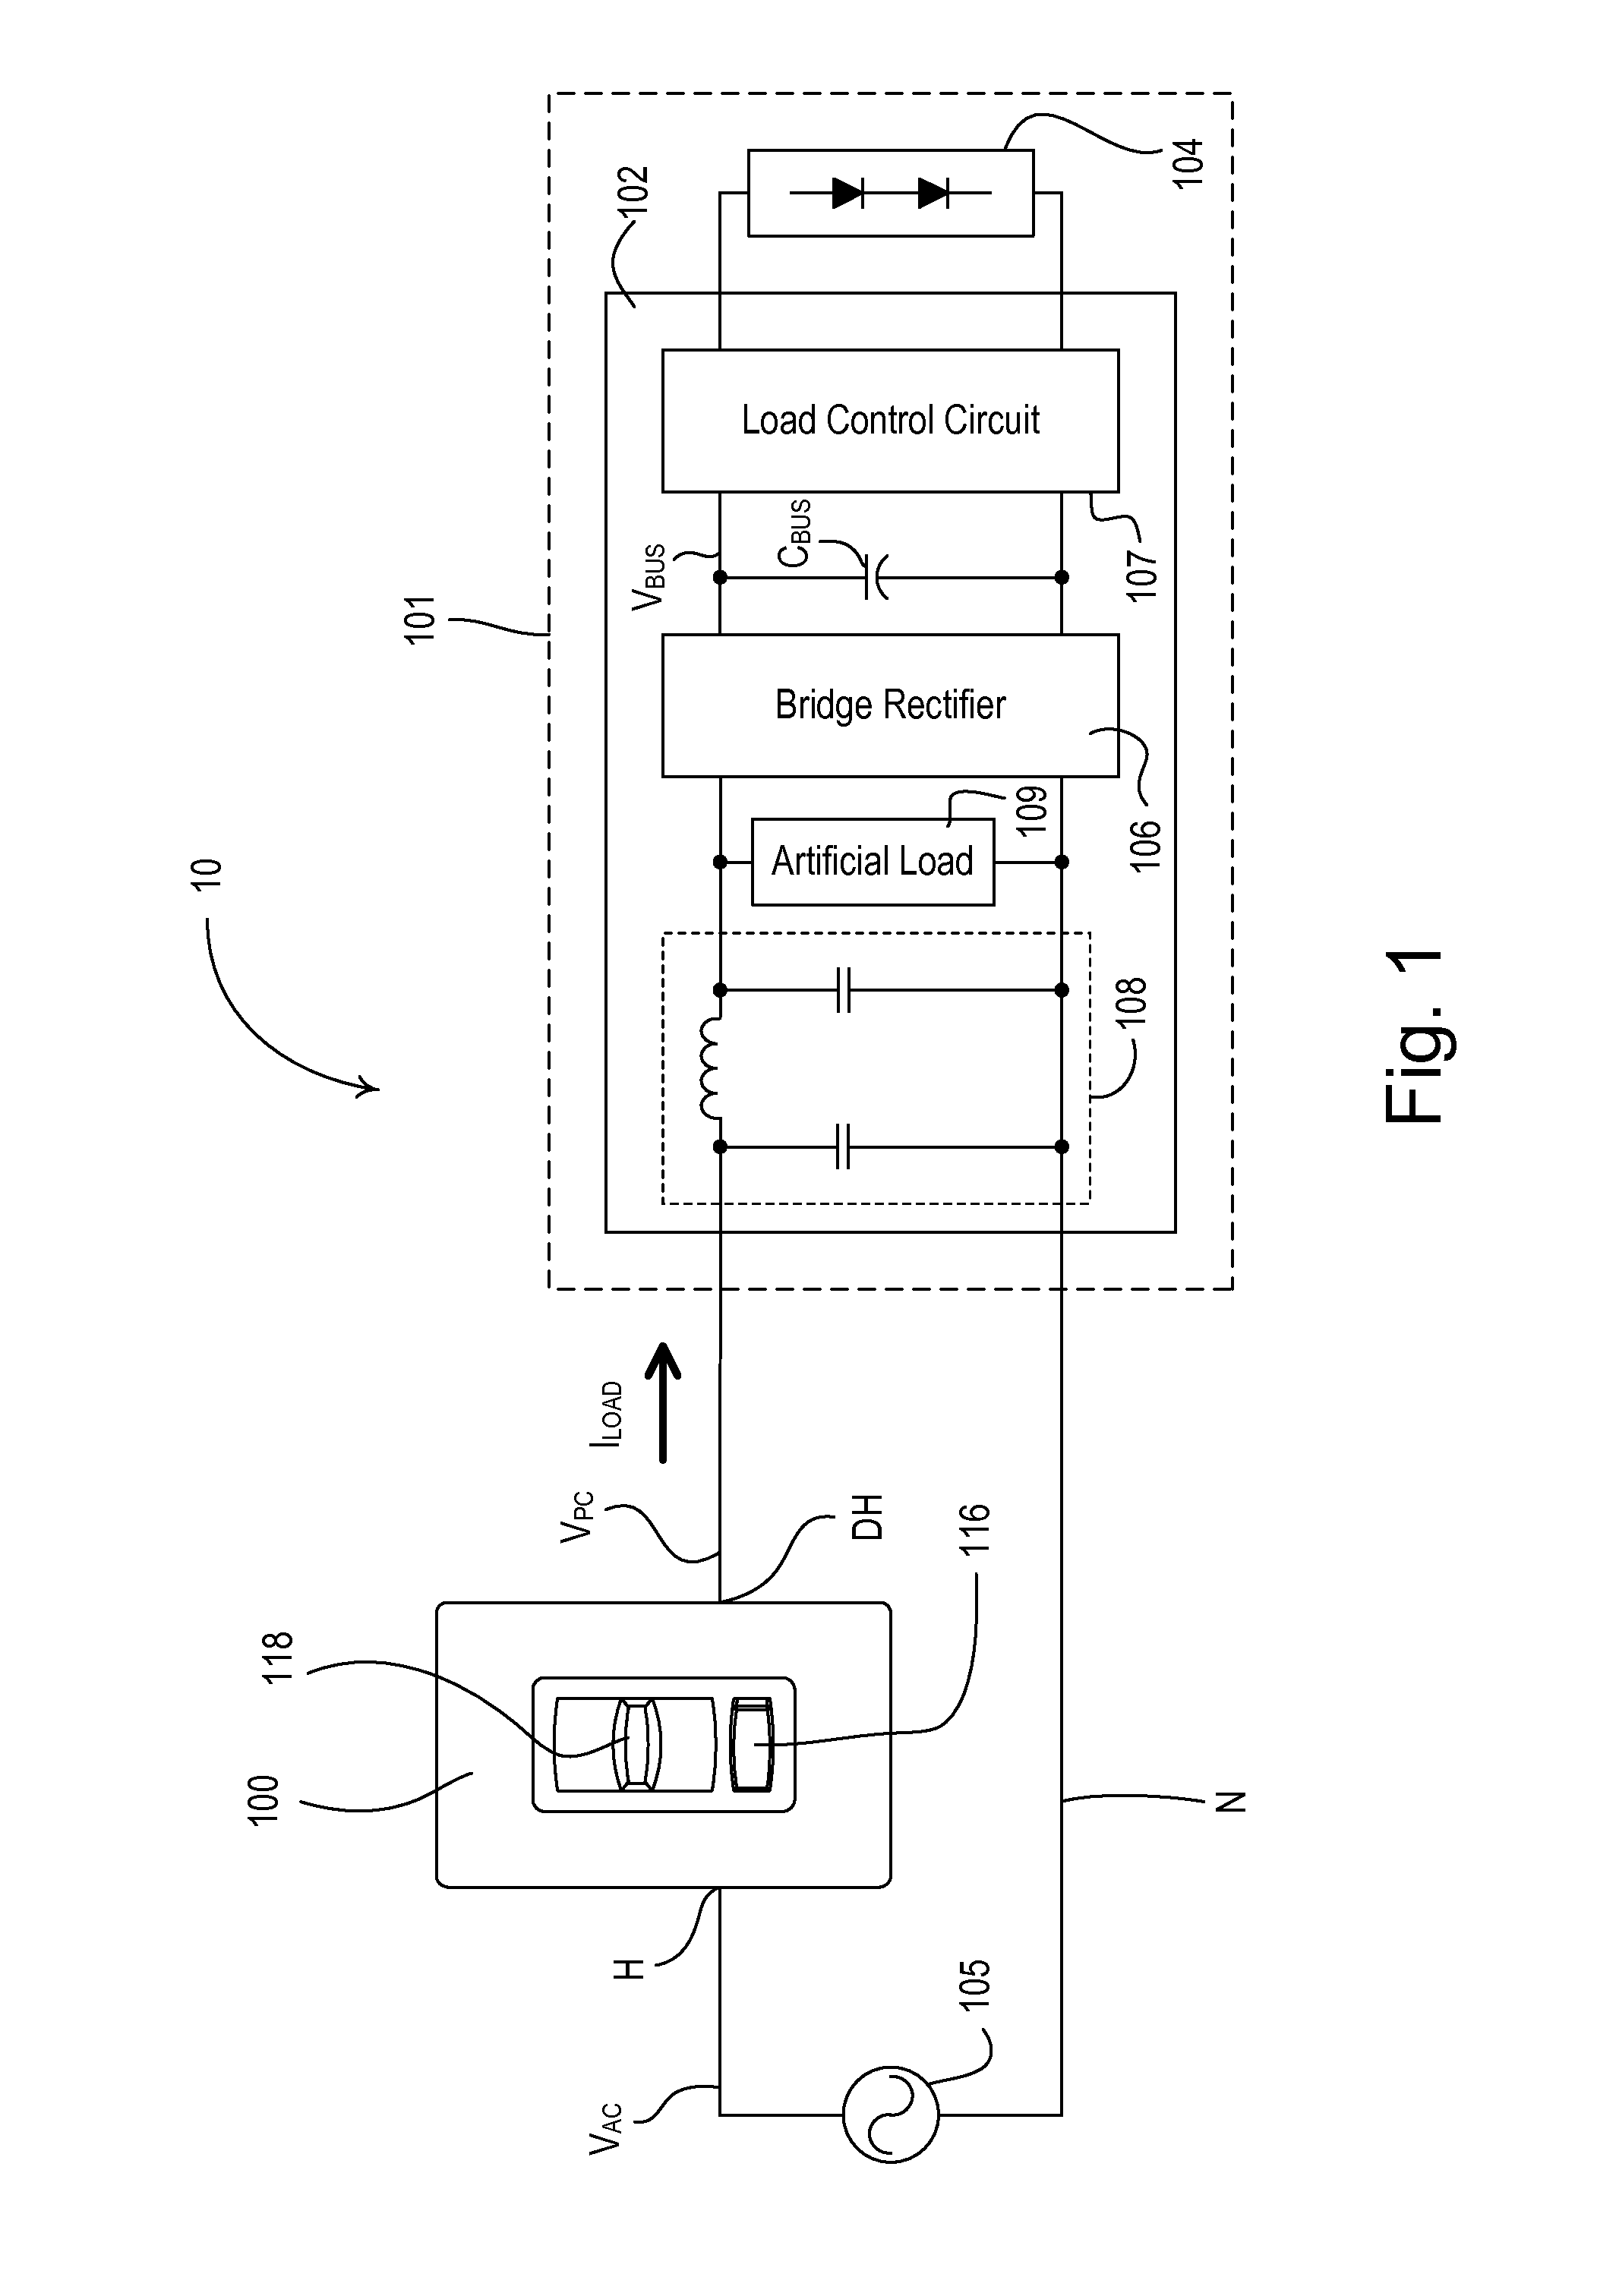 Two-wire load control device for low-power loads